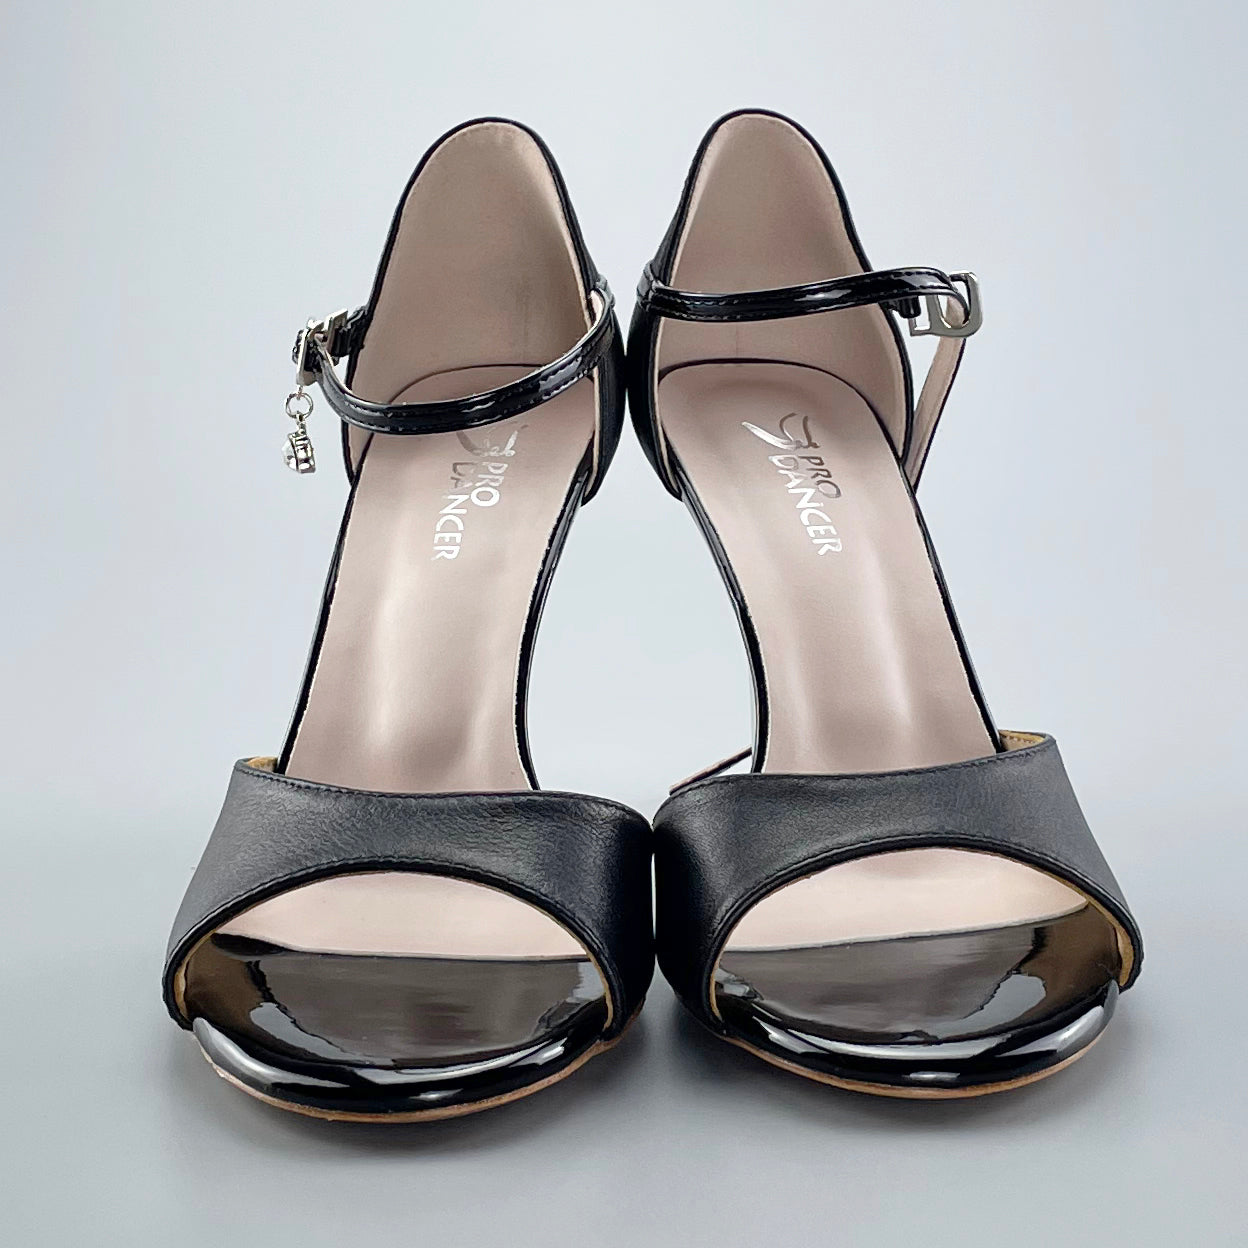 Pro Dancer Tango Shoes with High Heels, Leather Sole, Open-Toe PD-9042A8